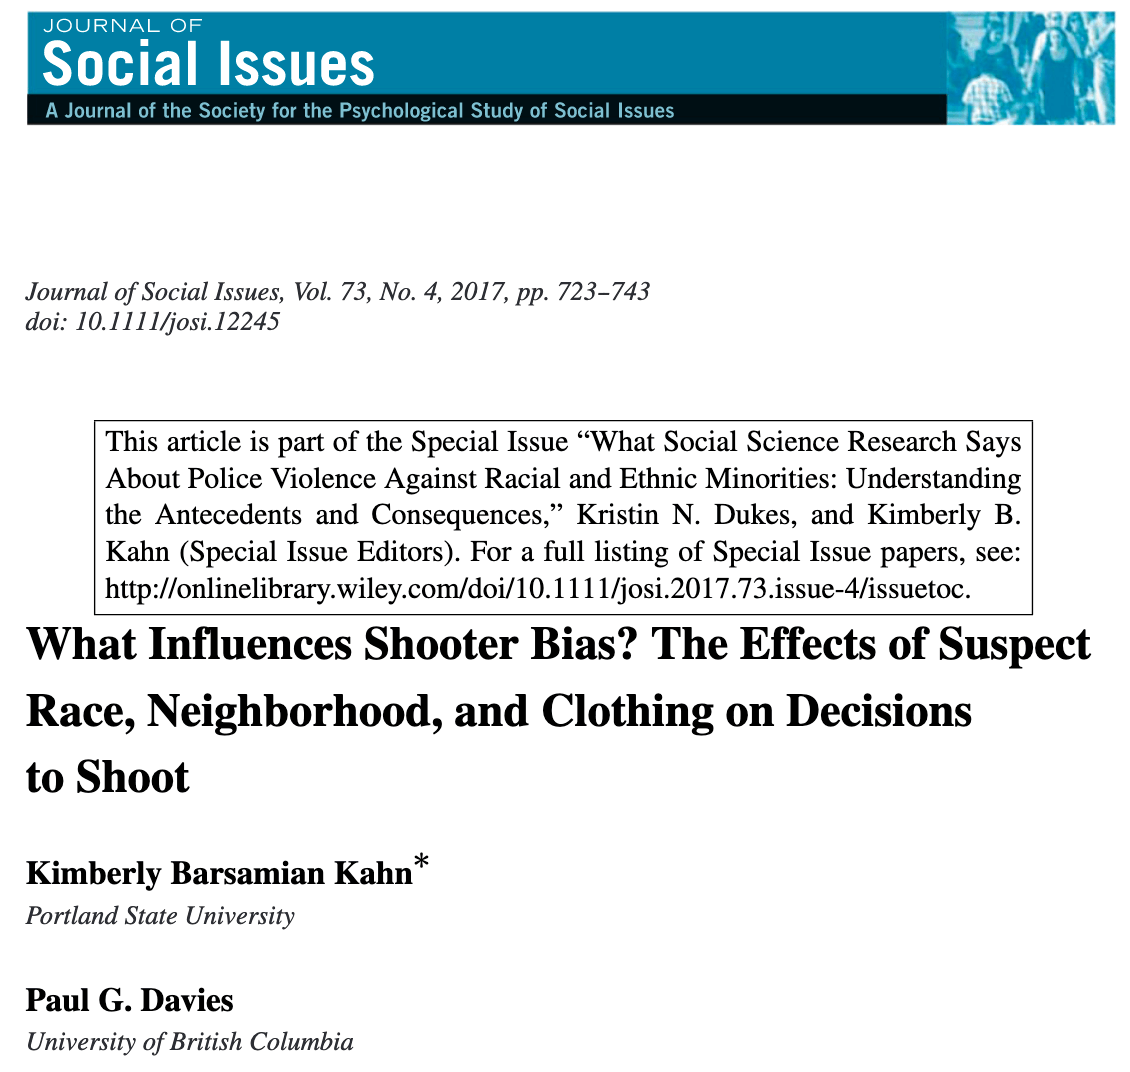 What Influences Shooter Bias? The Effects of Suspect Race, Neighborhood, and Clothing on Decisions to Shoot